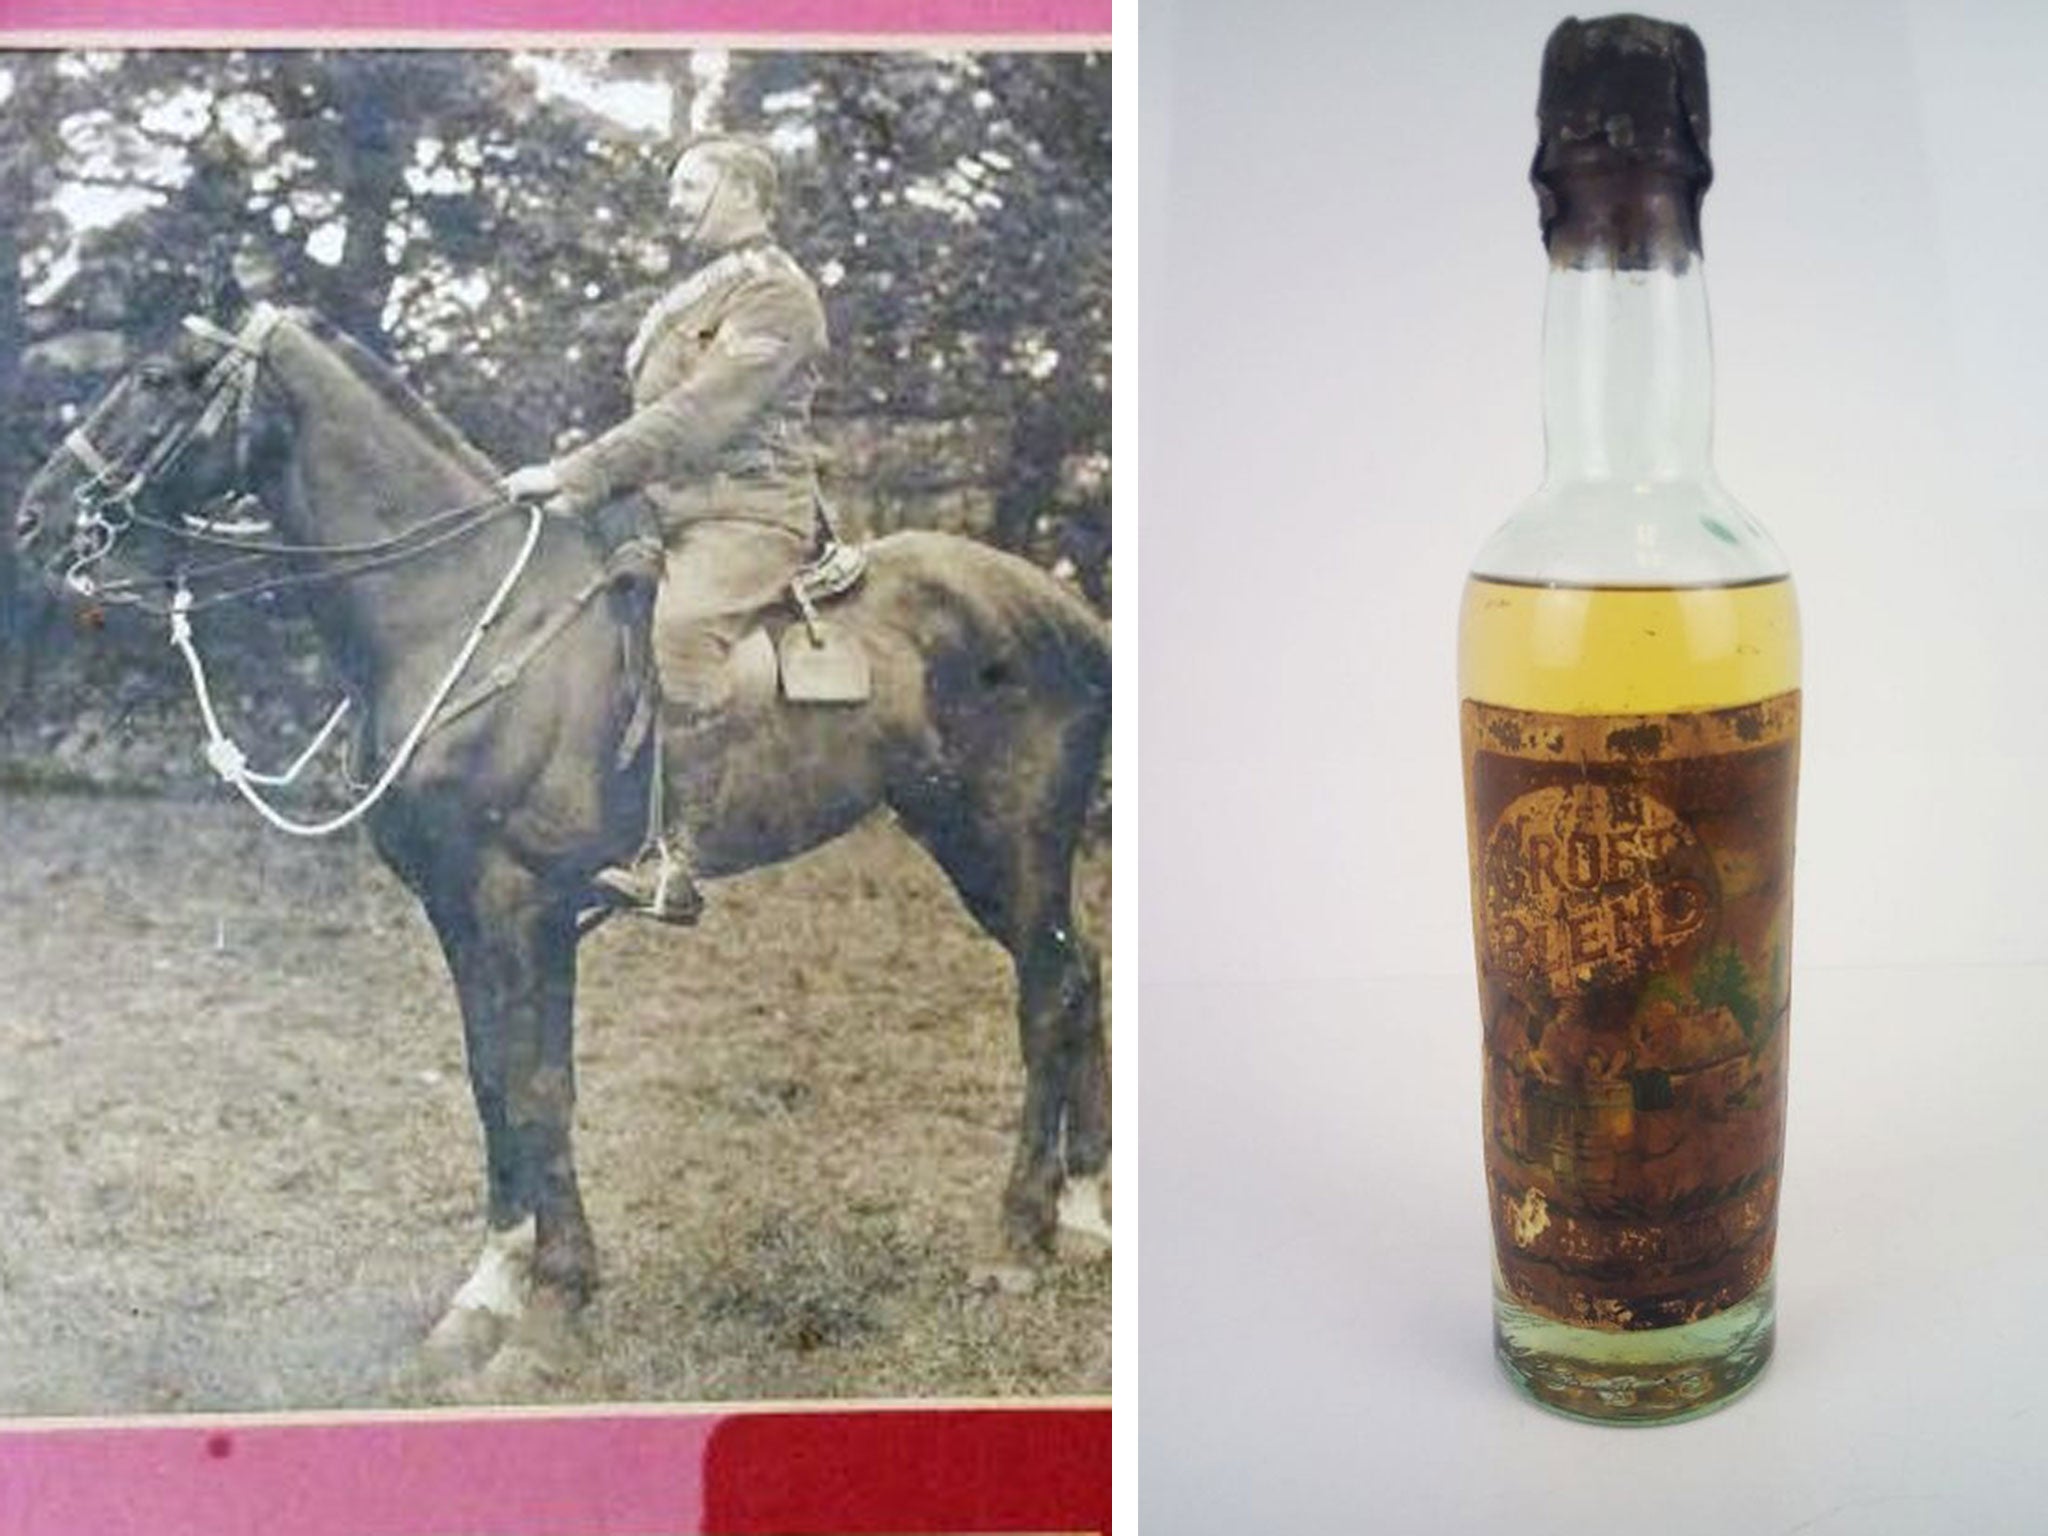 Corporal William Mill, as an unopened bottle of Croft Blend Fine Old Scotch whisky which was taken by him to the front line of the First World War is to be auctioned.